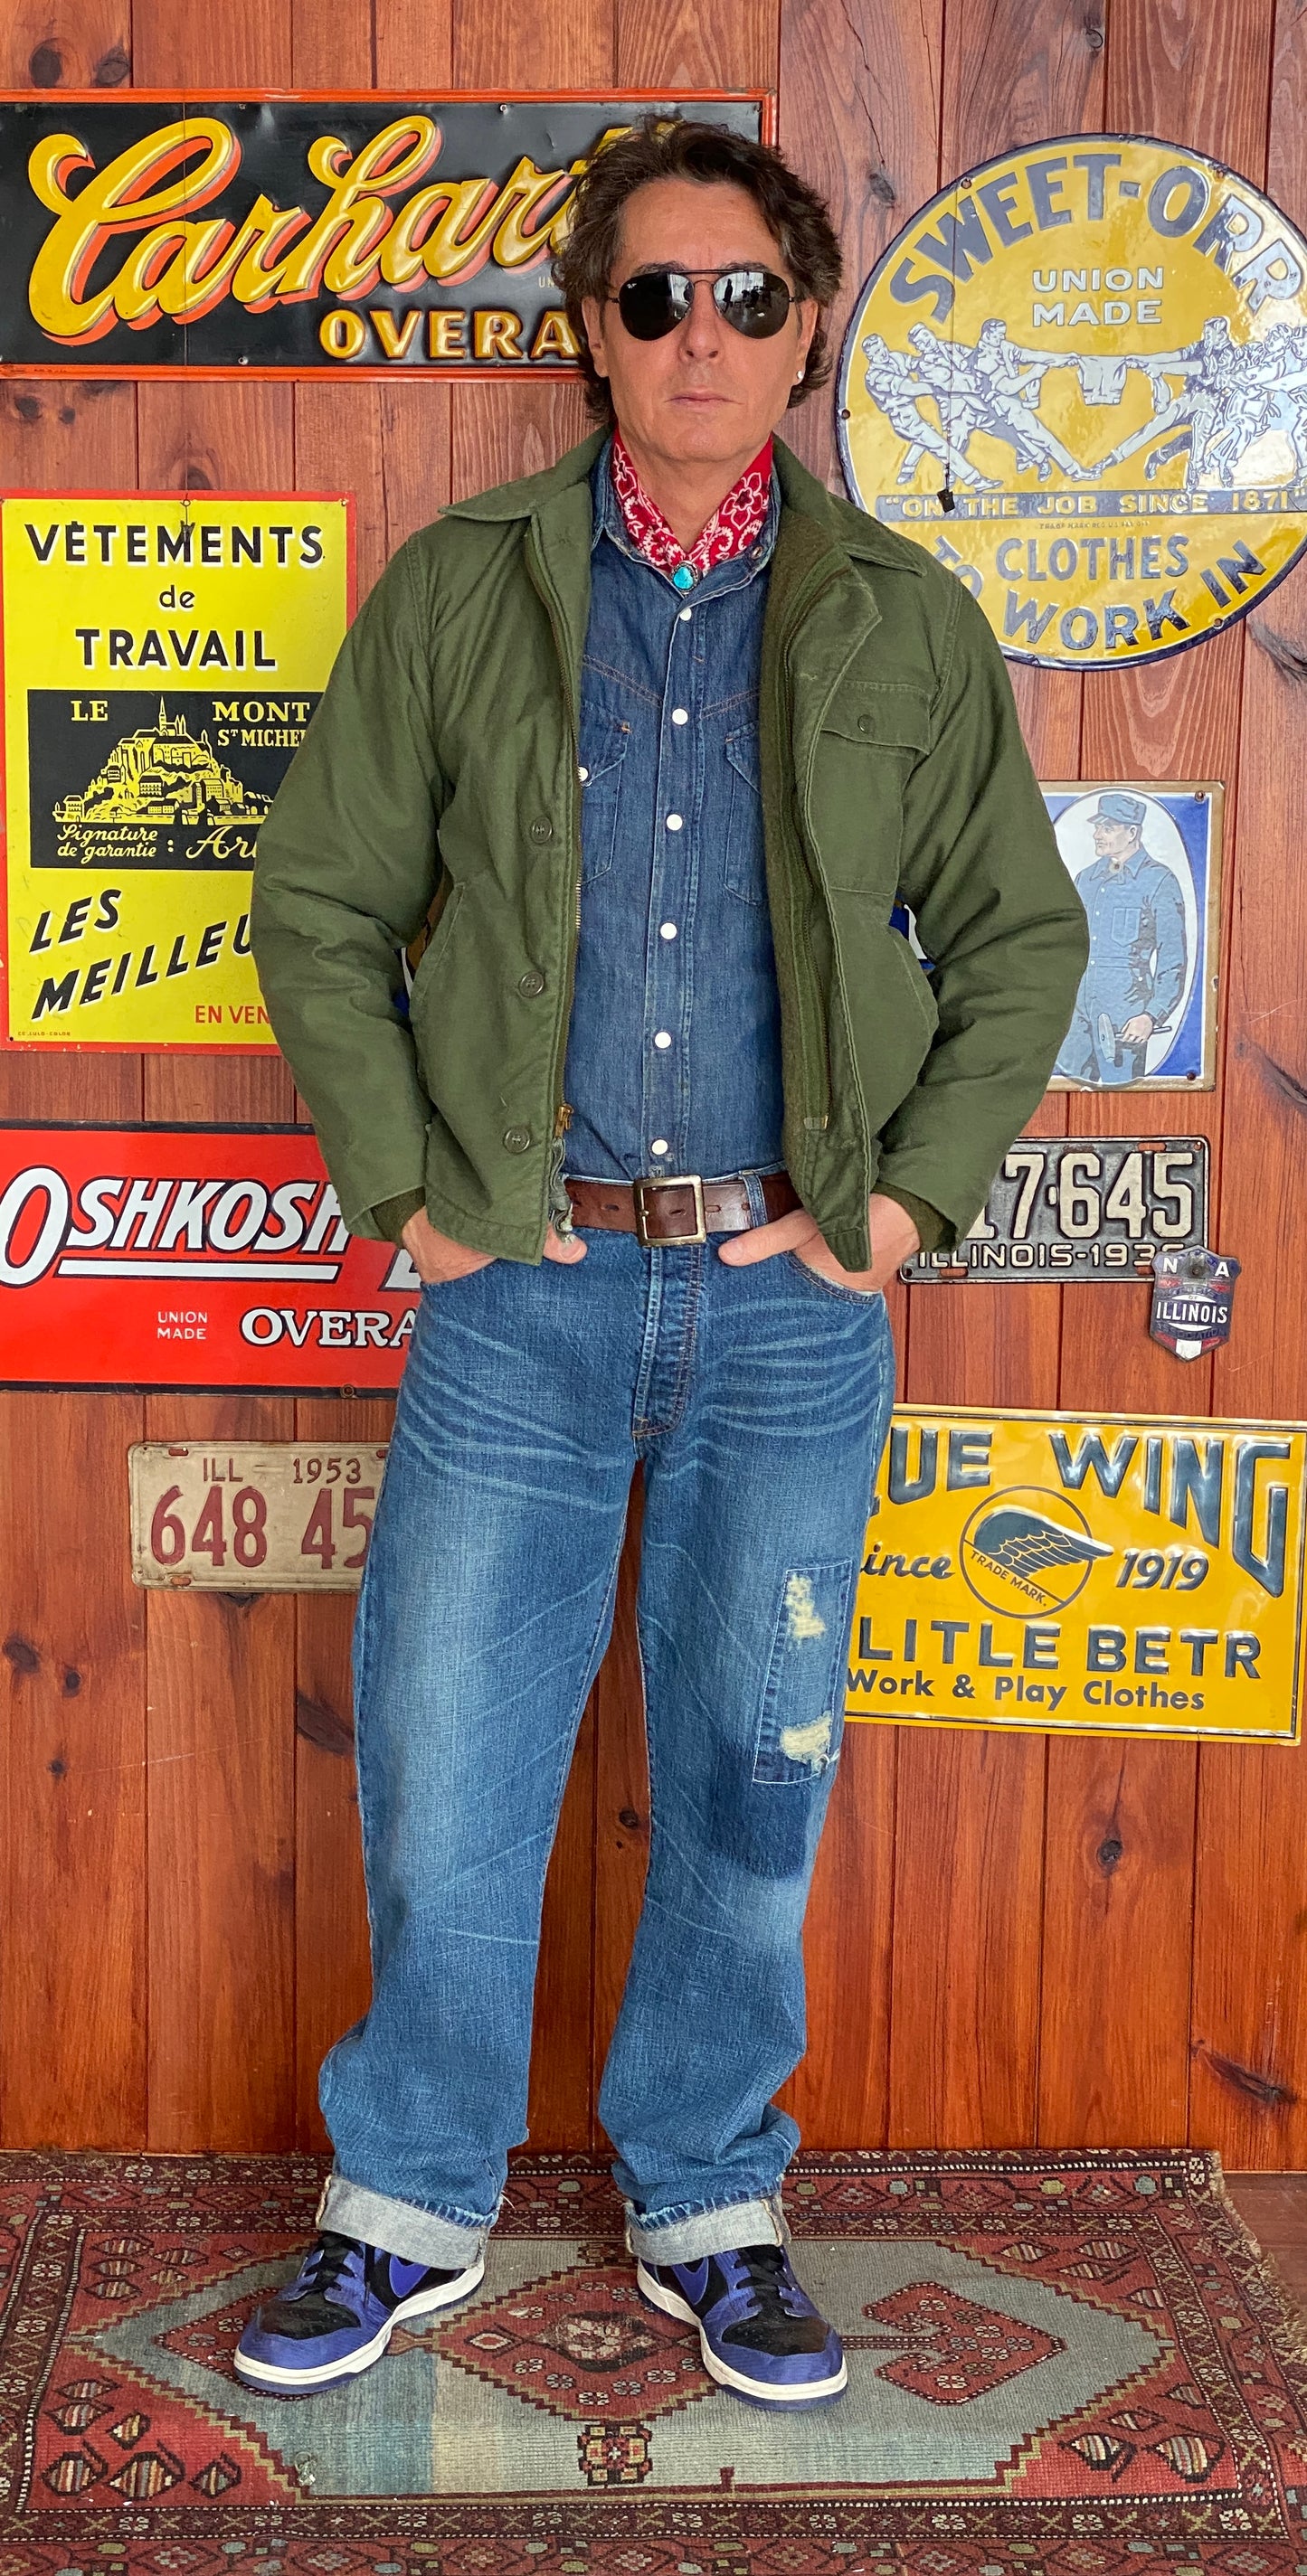 Authentic 1981 USN A2 Deck Jacket in Classic Olive Green | Vintage US Navy Apparel with Iconic Style, Durability, and Quality Craftsmanship